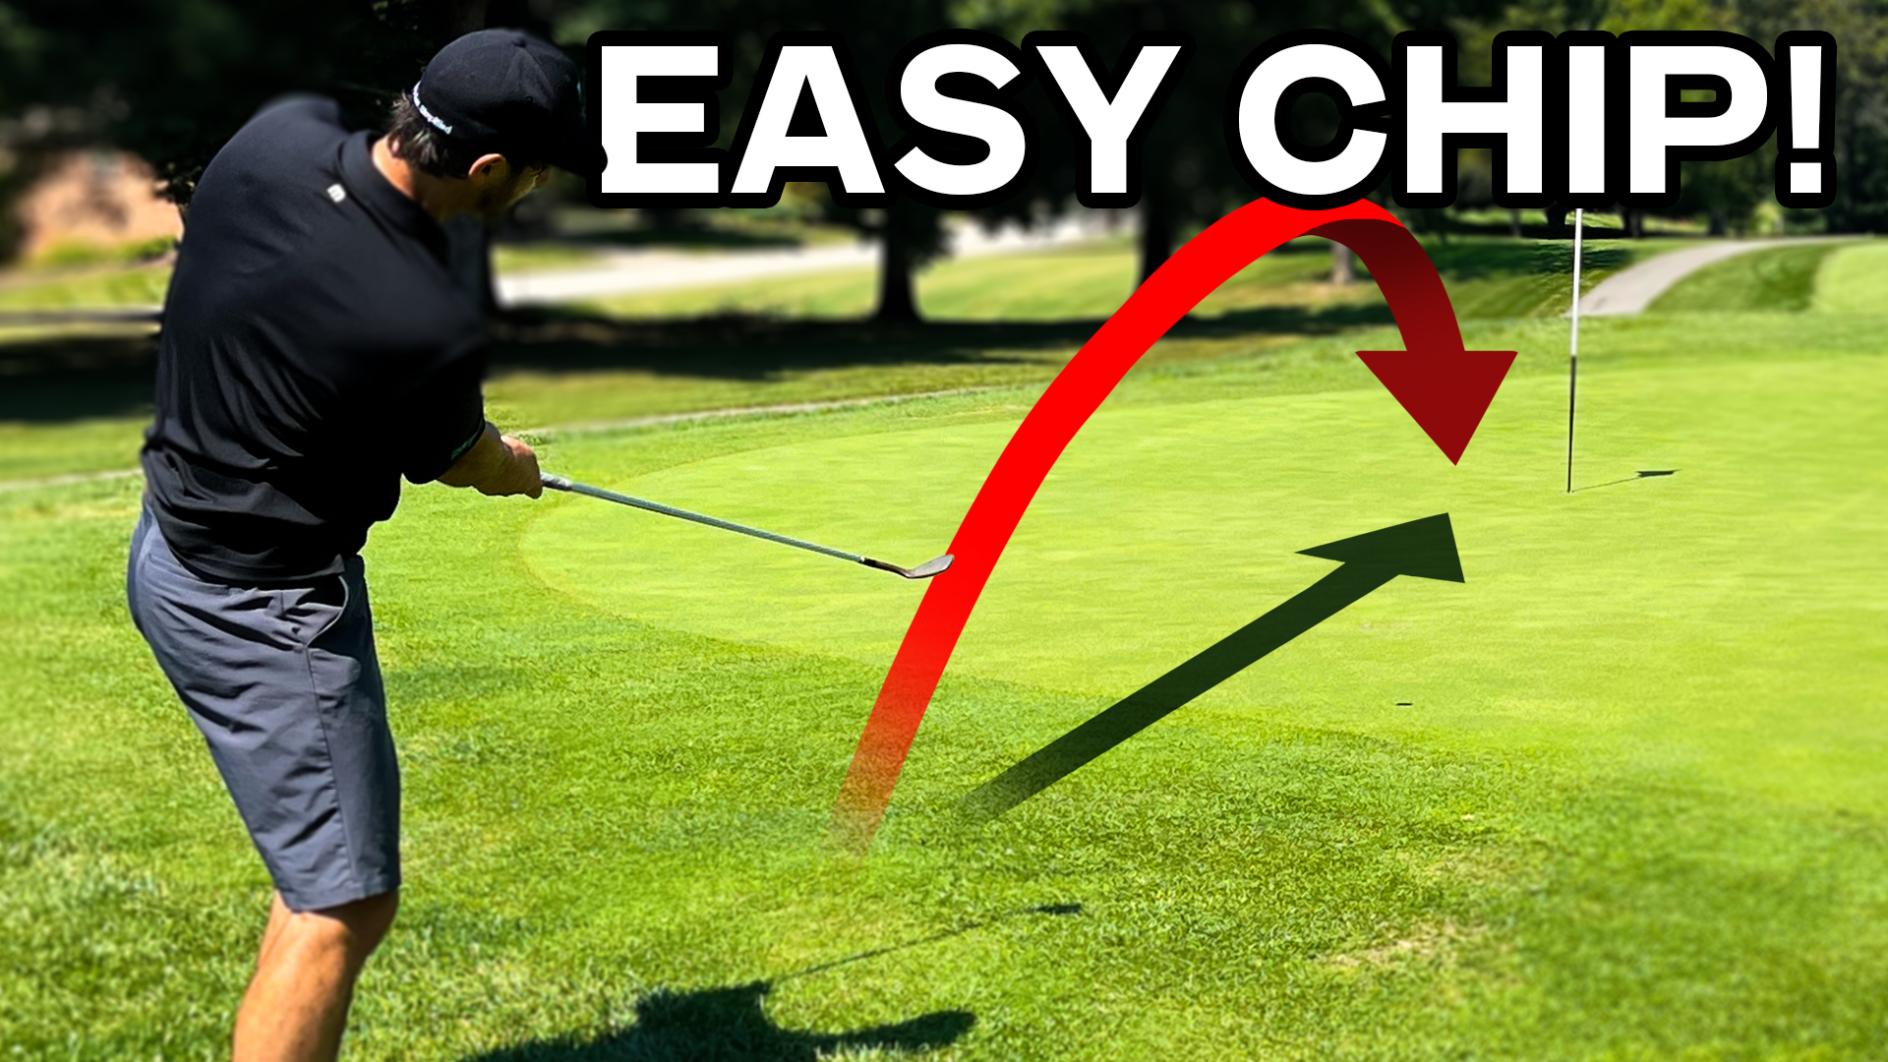 3 simple steps to chipping